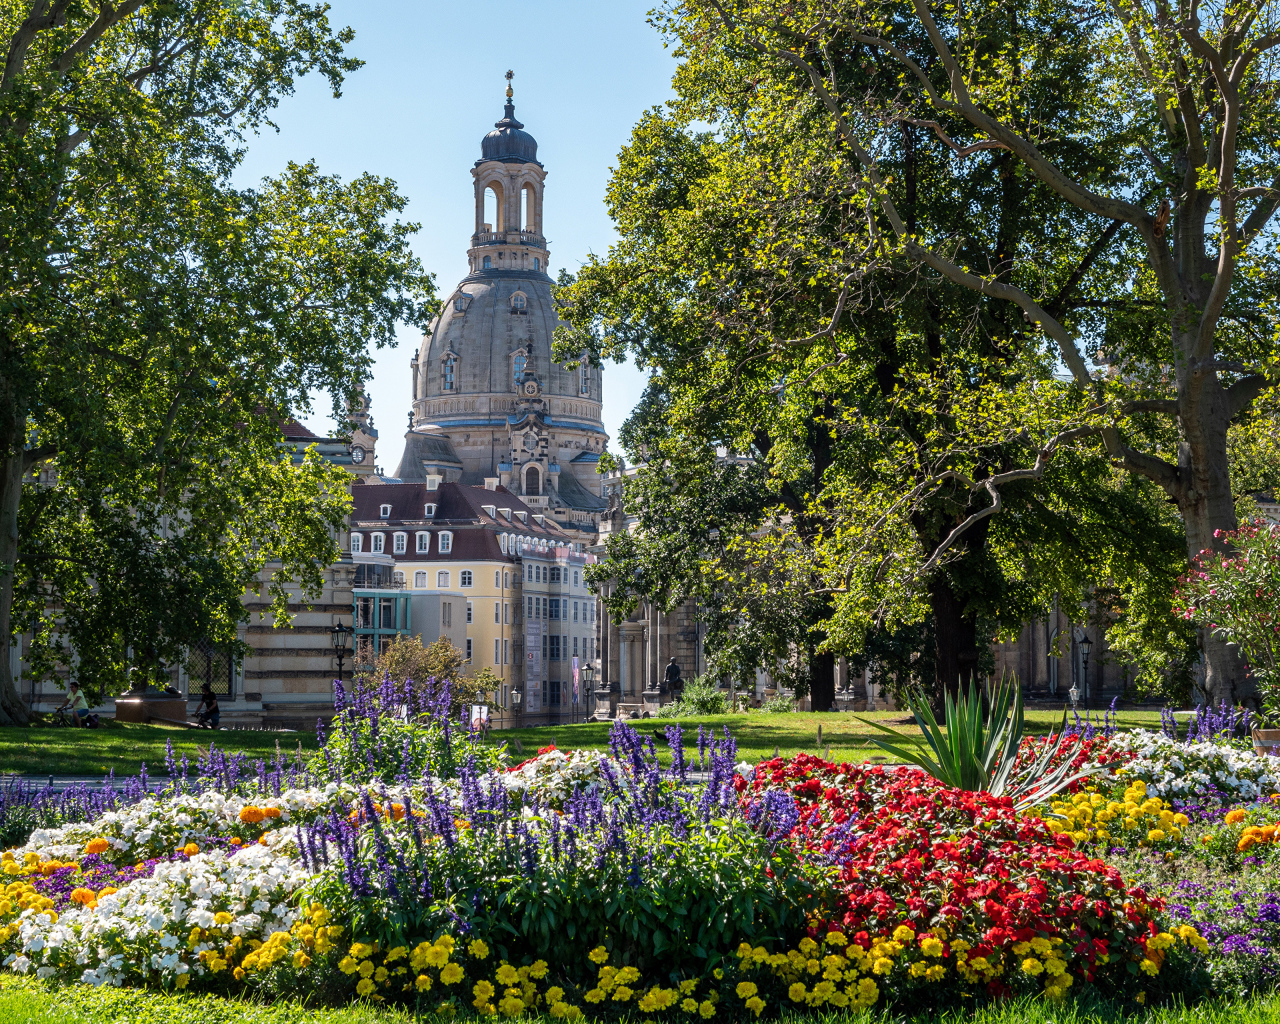 Old church in a picturesque park, Dresden. Germany